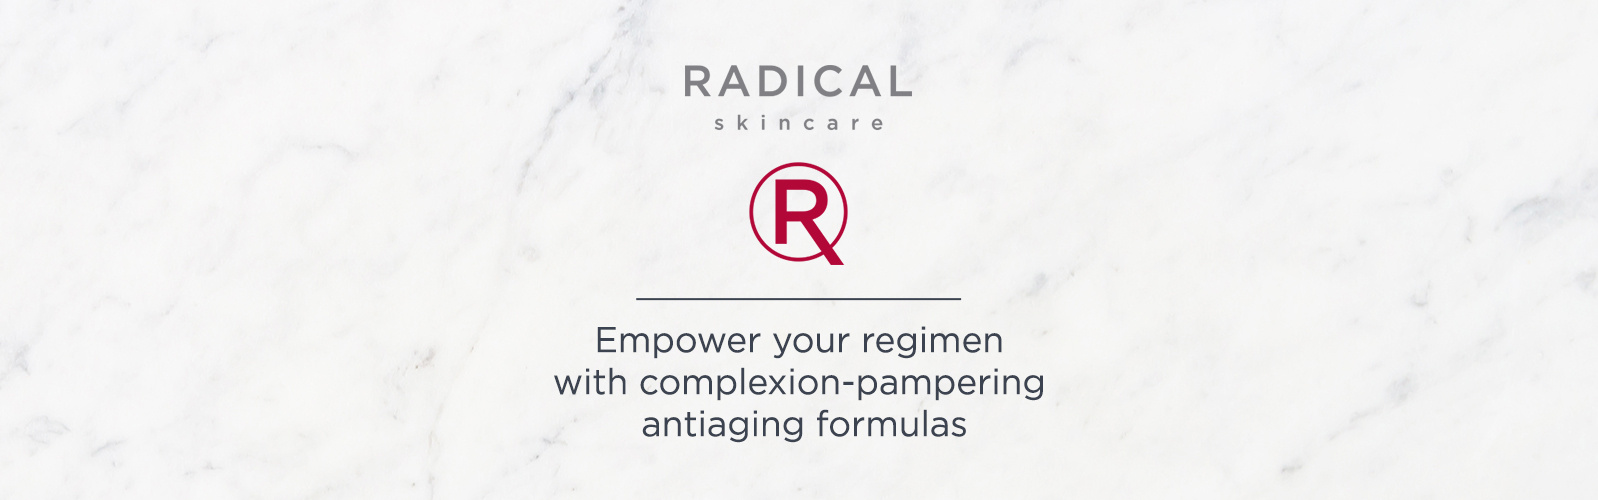 Radical Skincare Empower your regimen with complexion-pampering antiaging formulas